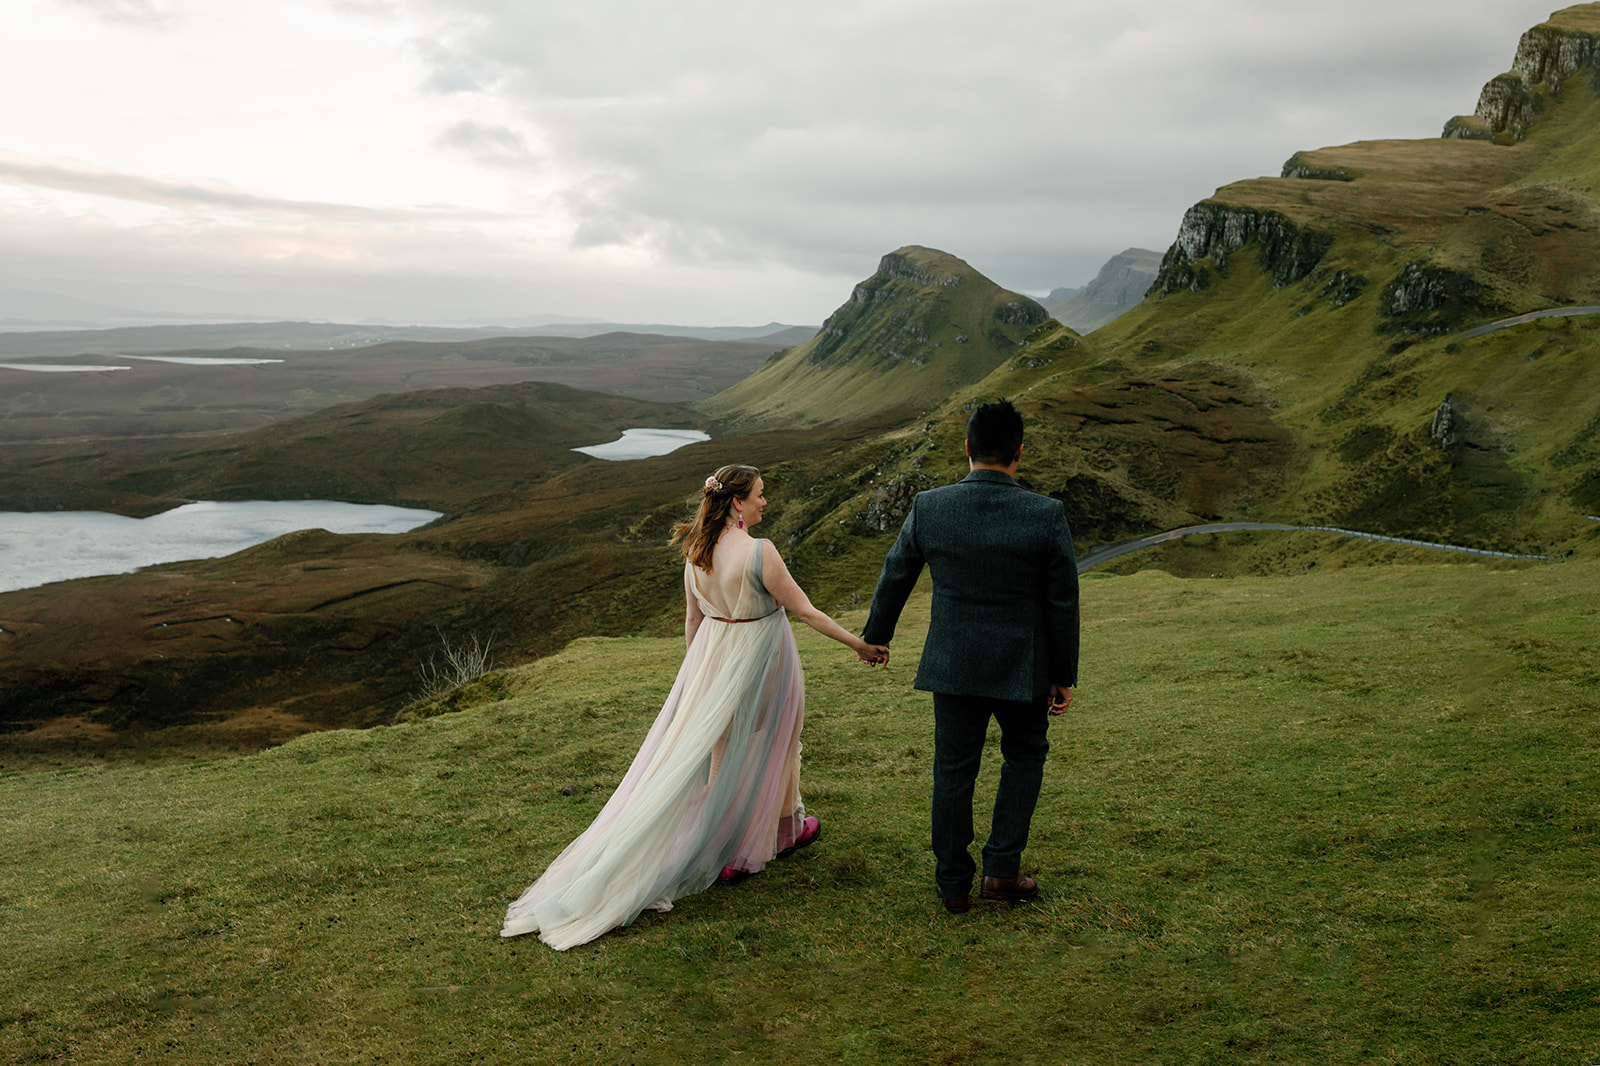 Mellie and Andrew stand hand in hand as they stare at the majestic view of Quiraing, Isle of Skye.